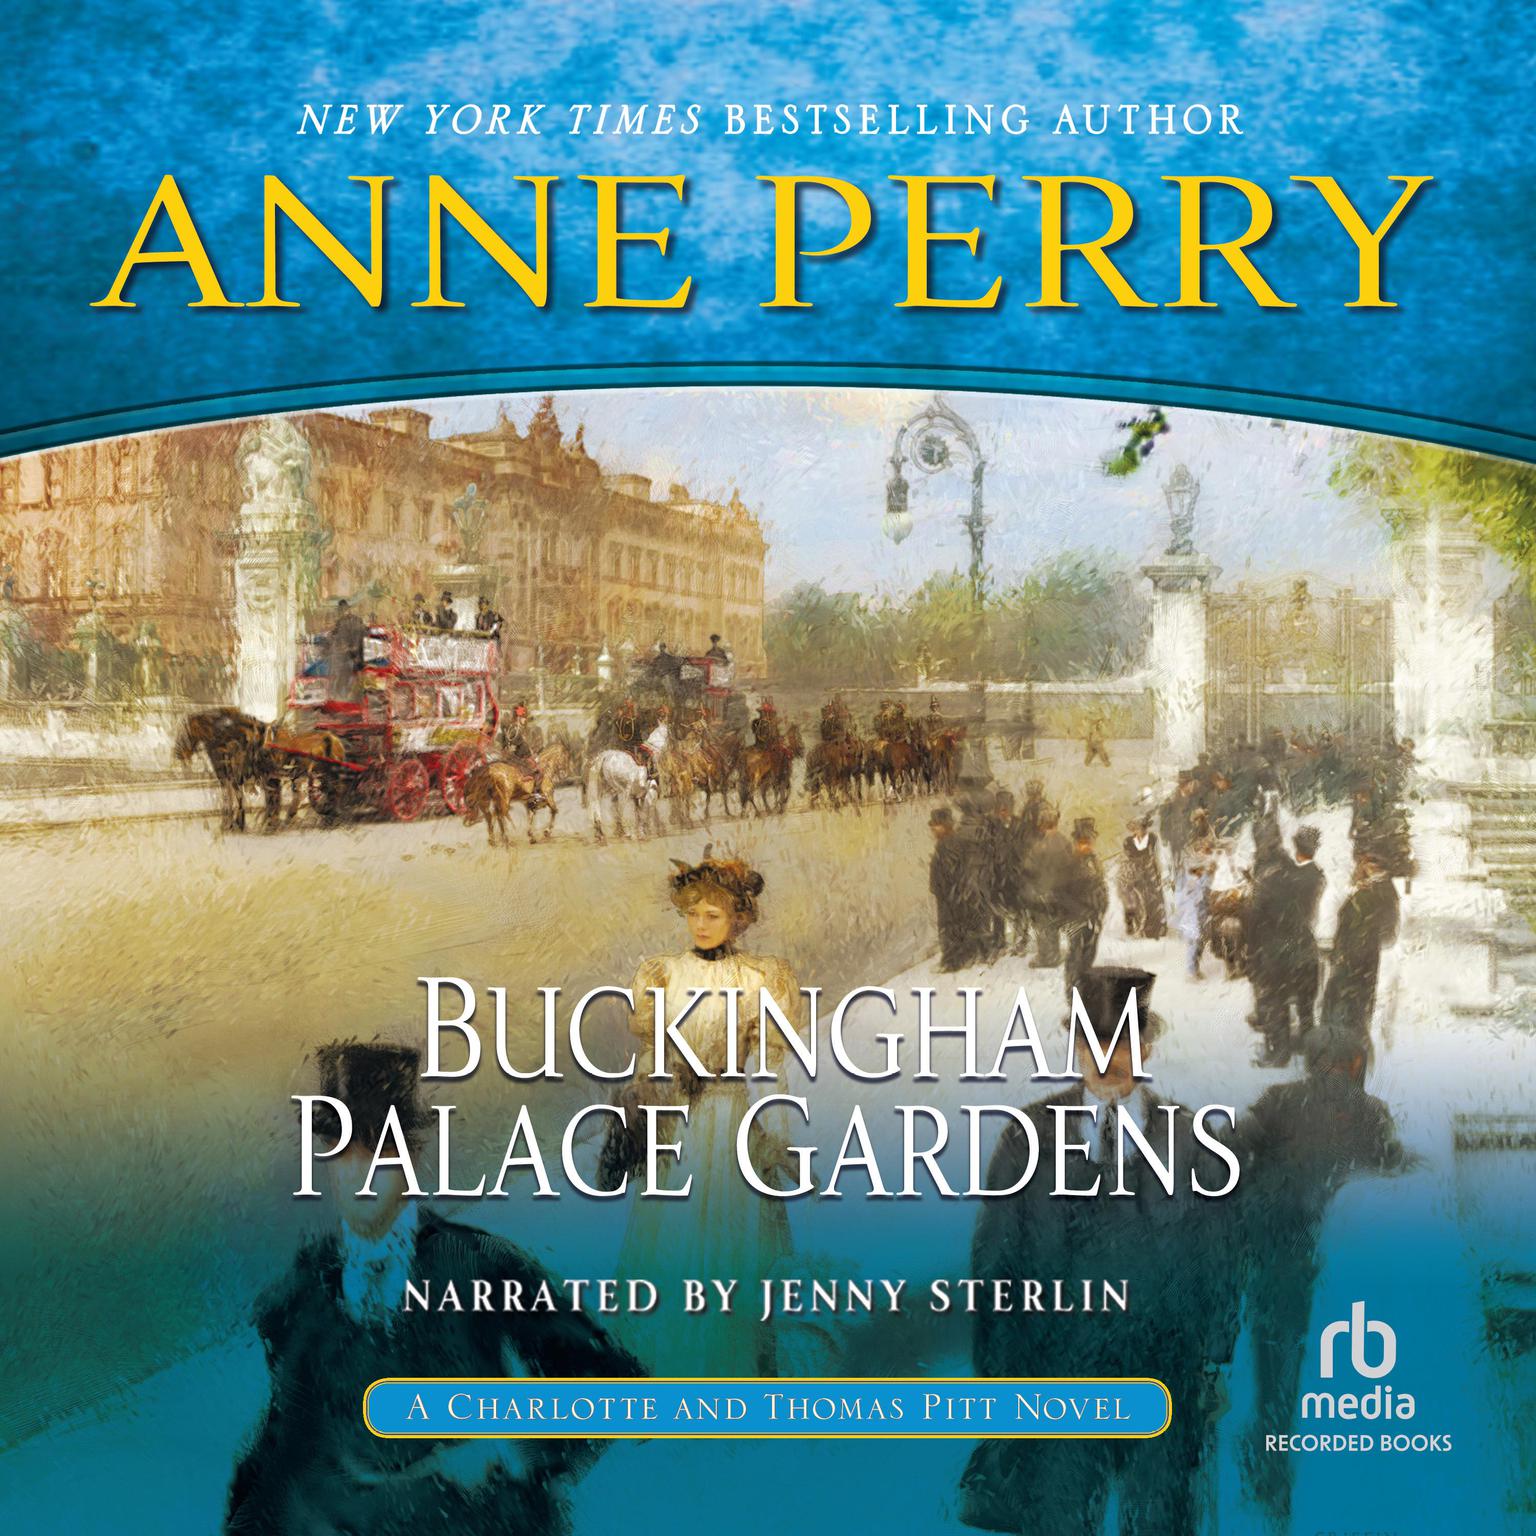 Buckingham Palace Gardens: A Novel Audiobook, by Anne Perry